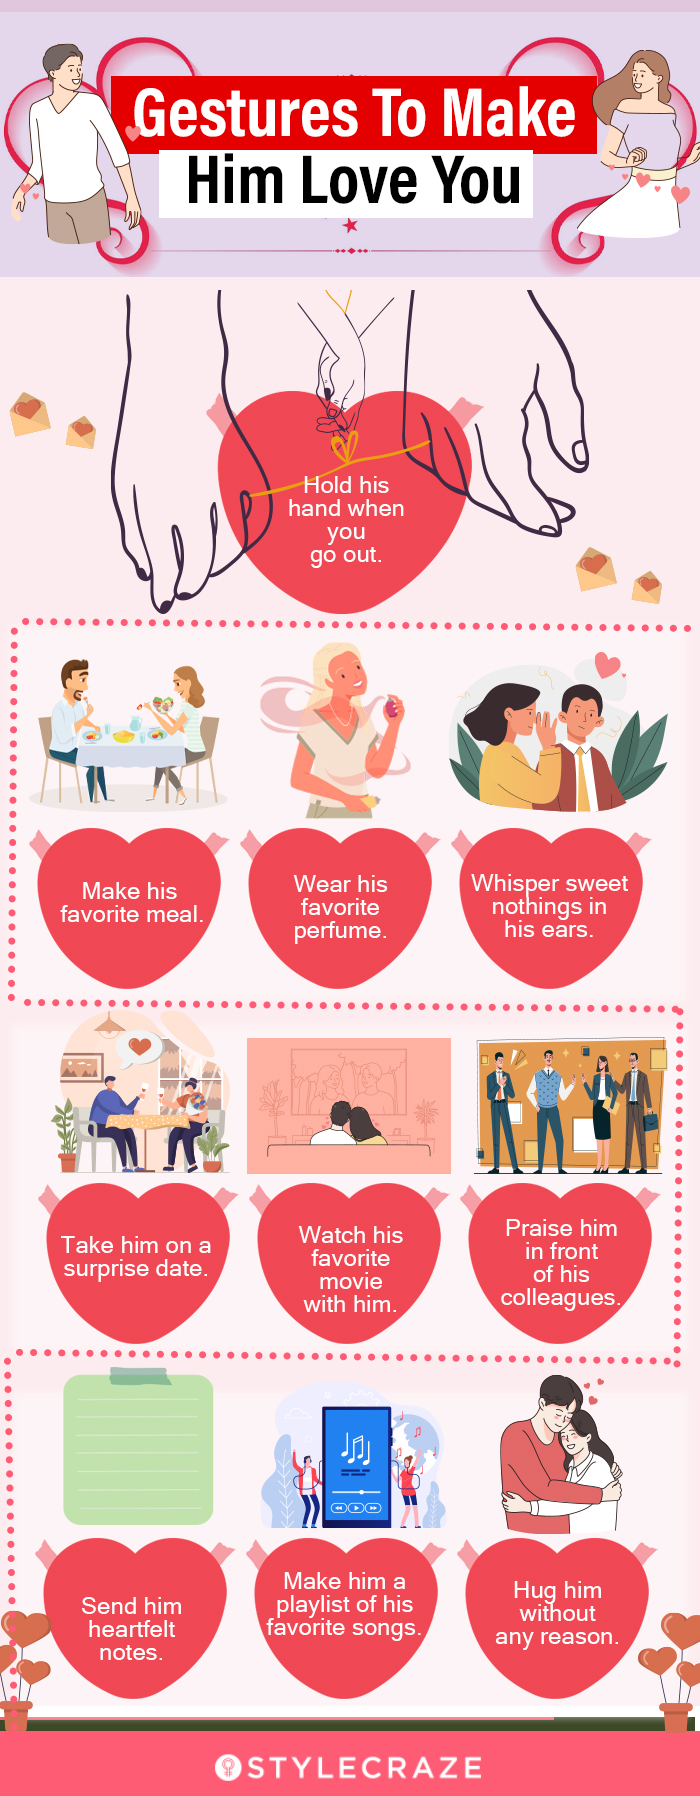 gestures to make him love you (infographic)